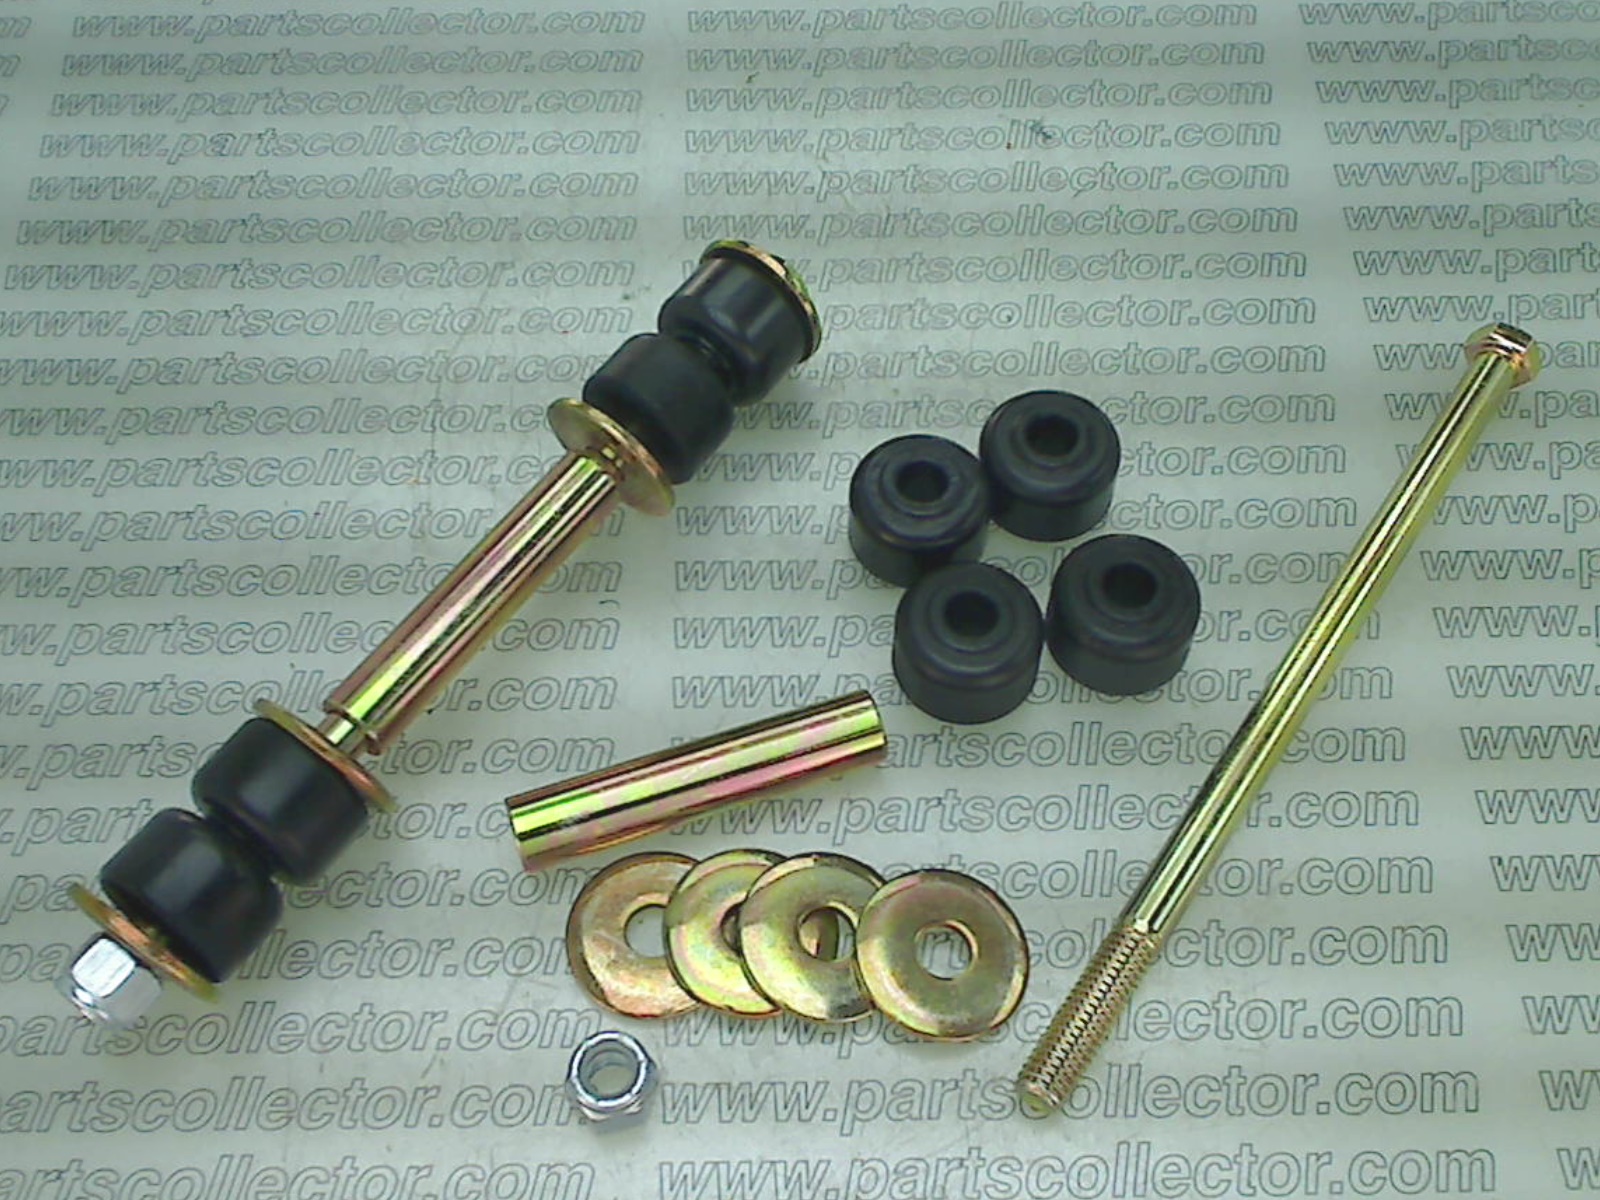 PAIR OF FRONT STABILIZER END LINKS